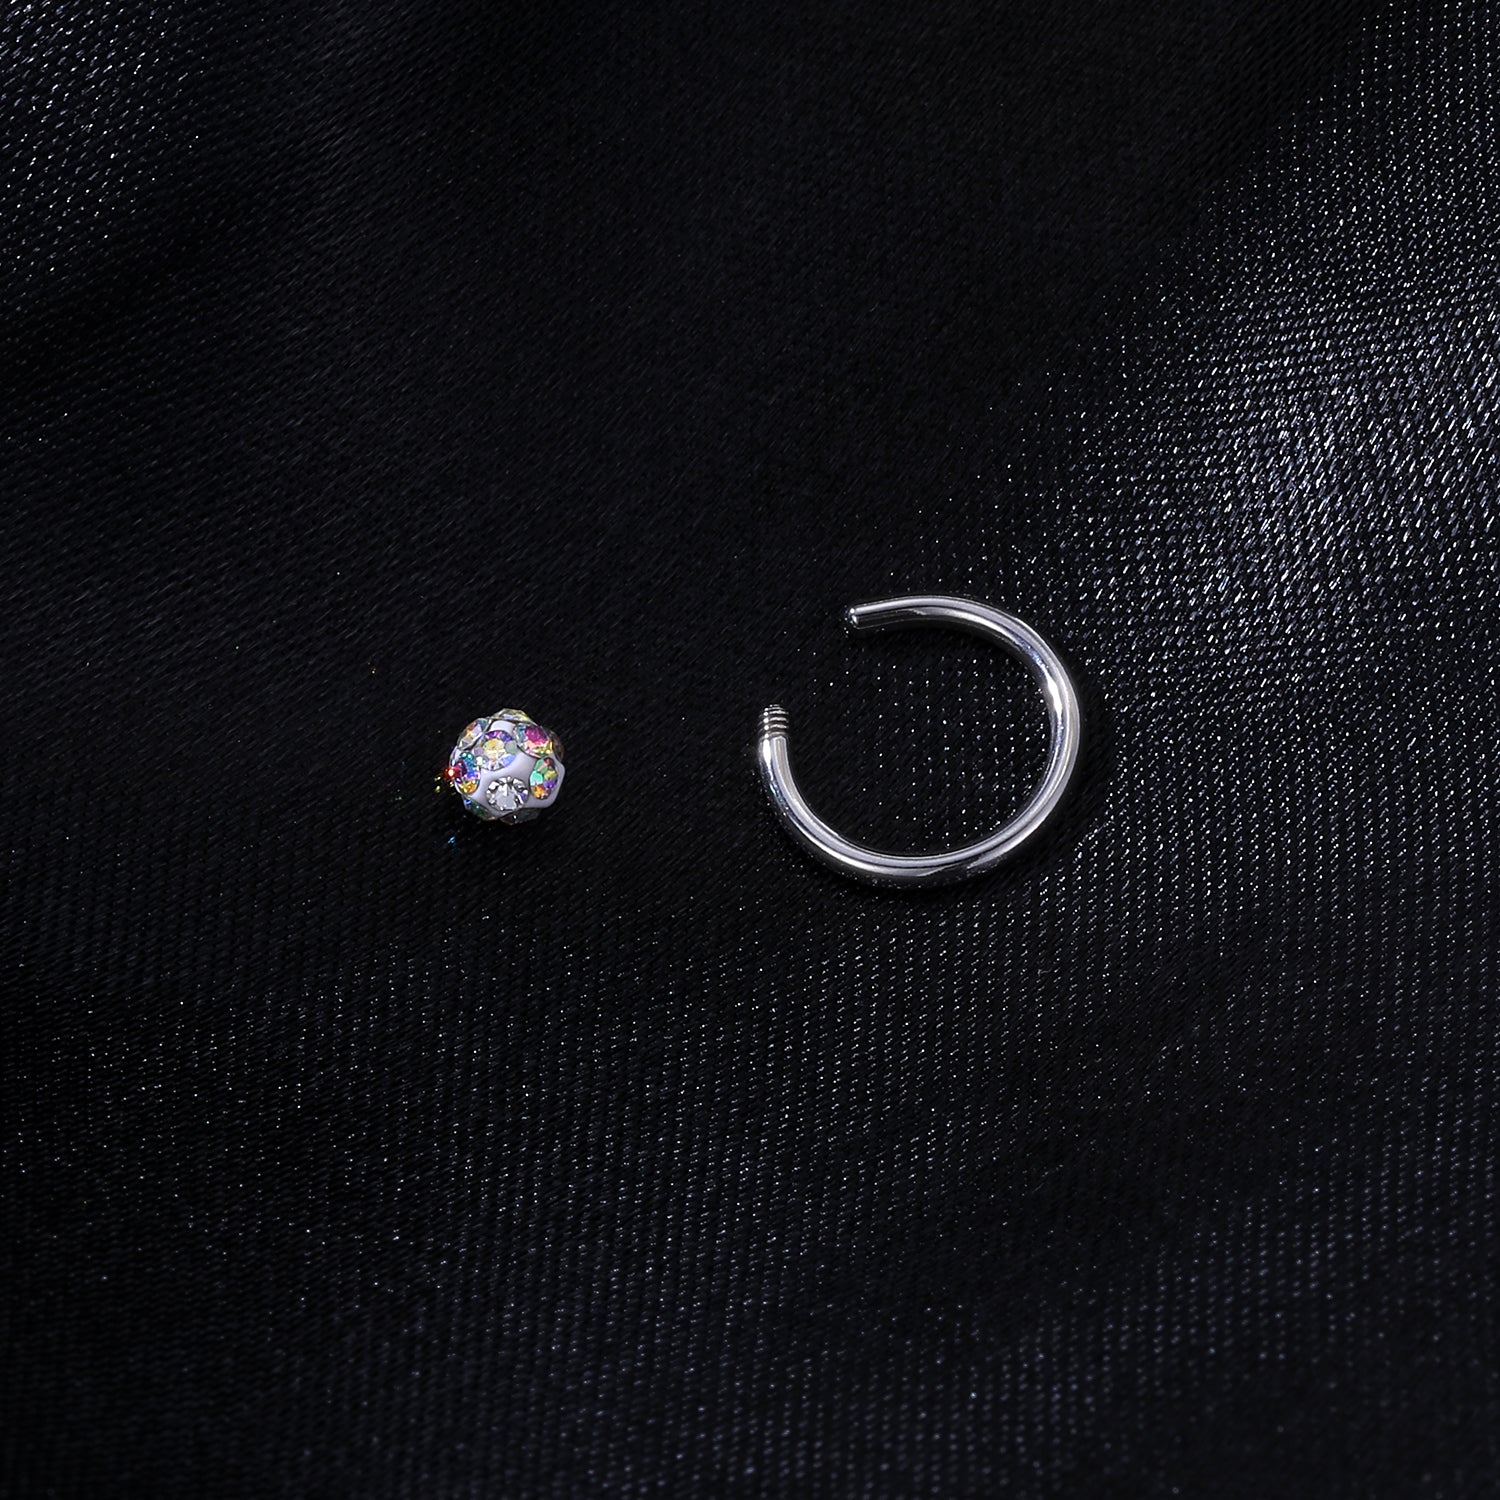 16g-ab-white-crystal-rose-gold-nose-ring-stainless-steel-helix-cartilage-piercing